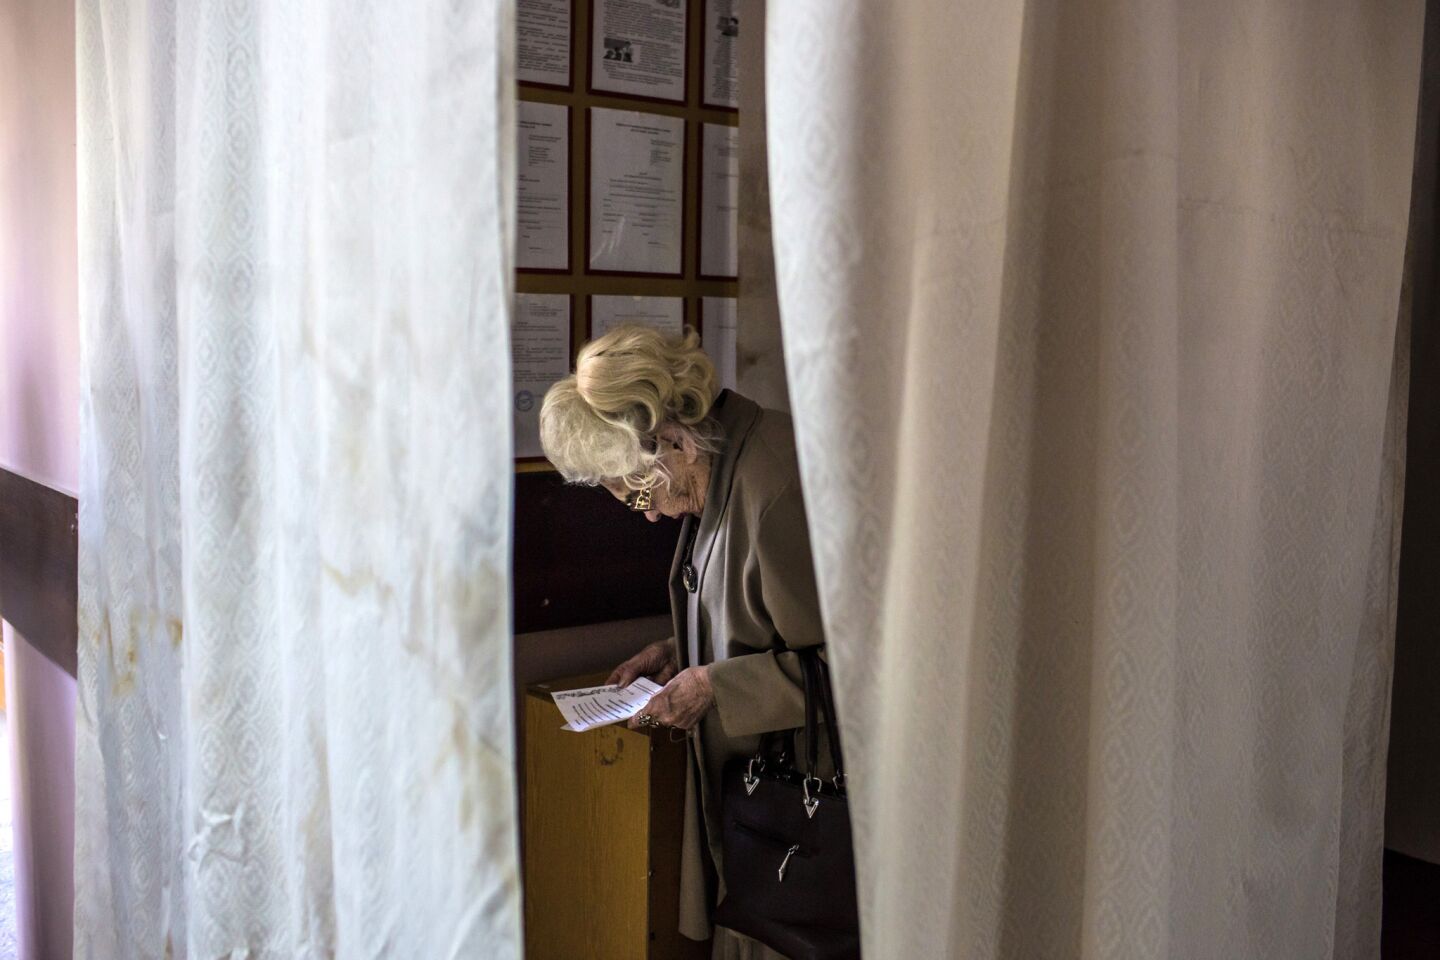 A woman examines her ballot at a polling station in Mariupol, Ukraine, on May 11 during a referendum on greater autonomy for eastern Ukraine.